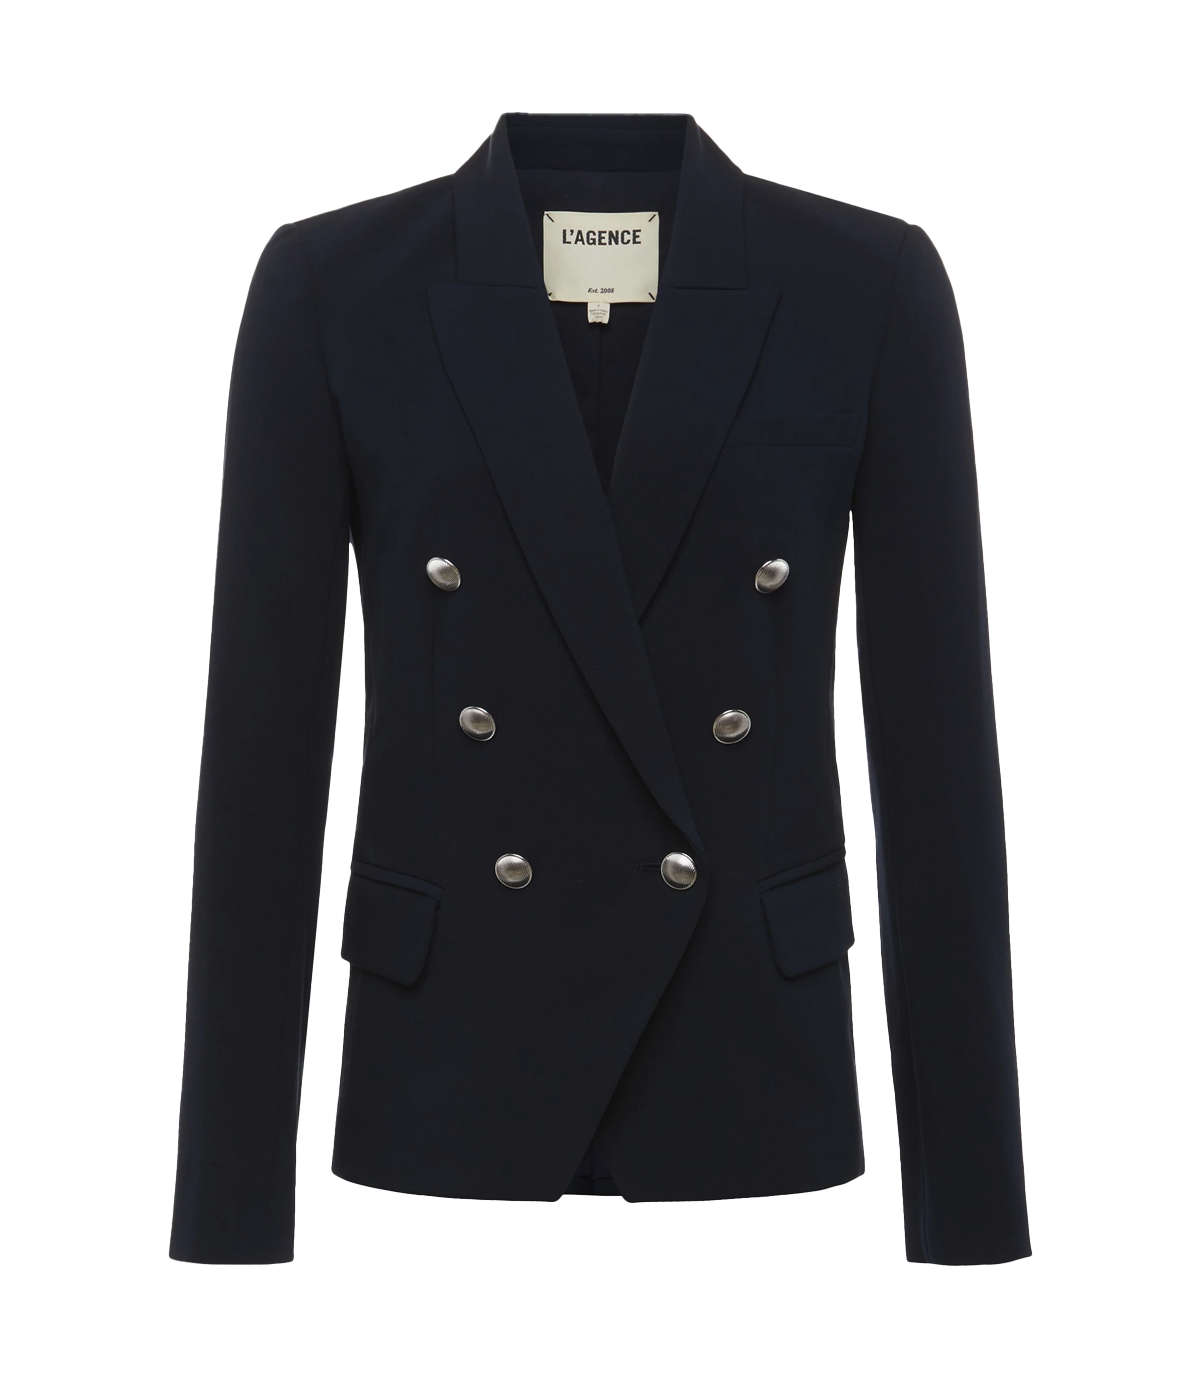 Image of a classic chic navy blazer, with double breasted button closure, cotton, strong shoulders, peaked lapels, flat pockets. Workwear, basic blazer, classic look, made in USA.  